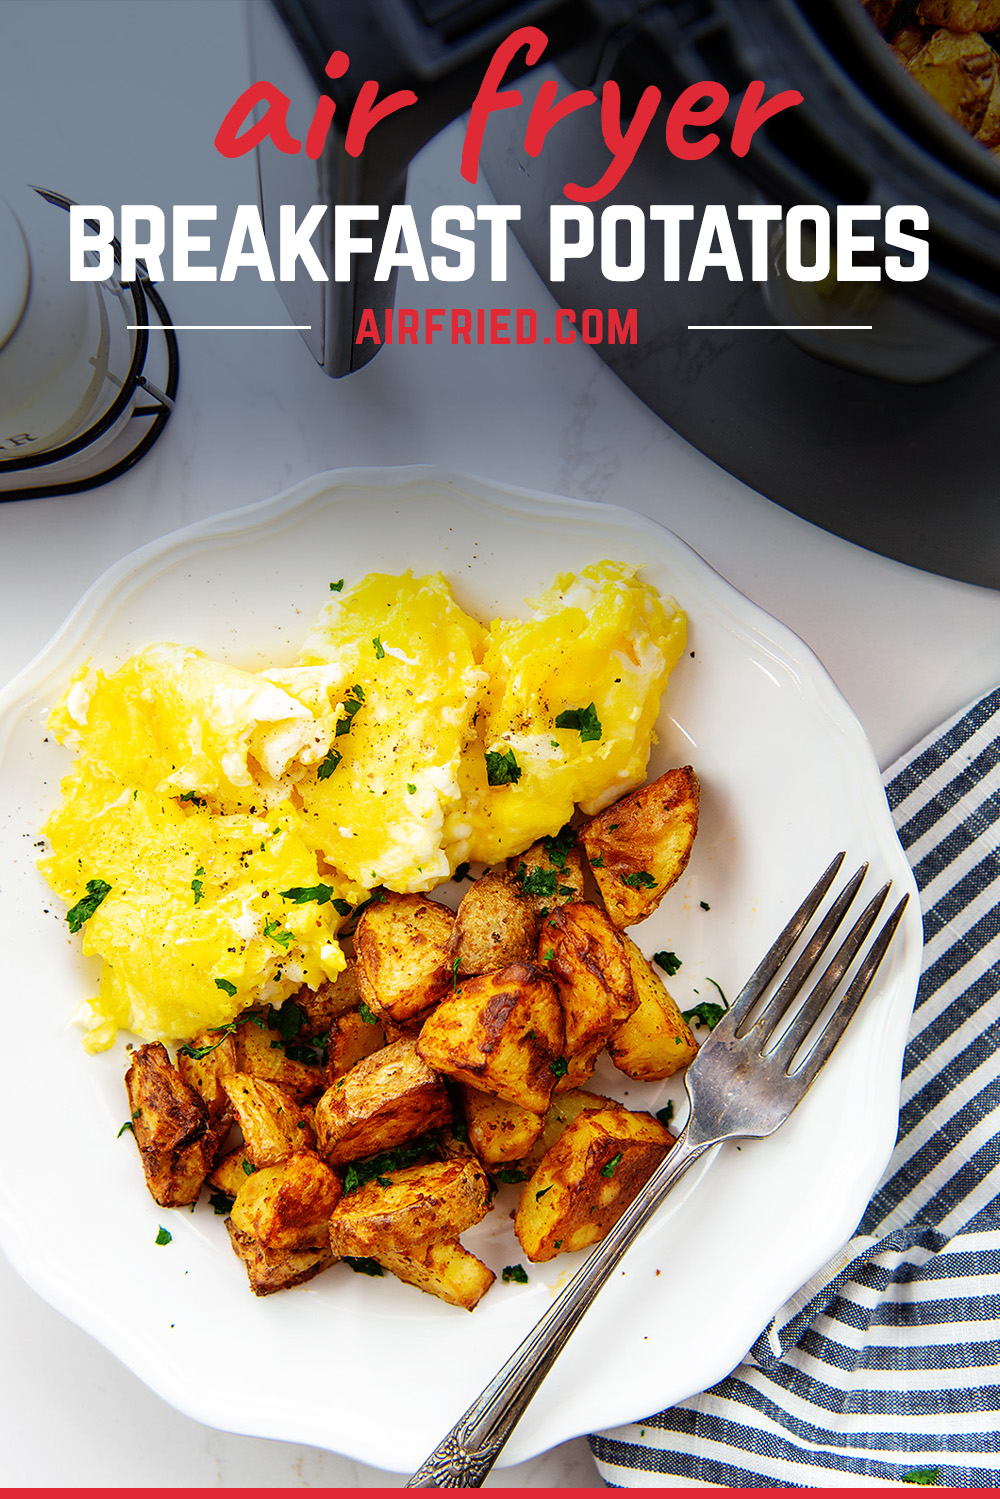 These potatoes are seasoned with paprika and garlic, then cooked easily in the air fryer! #airfried #breakfast #roastedpotatoes